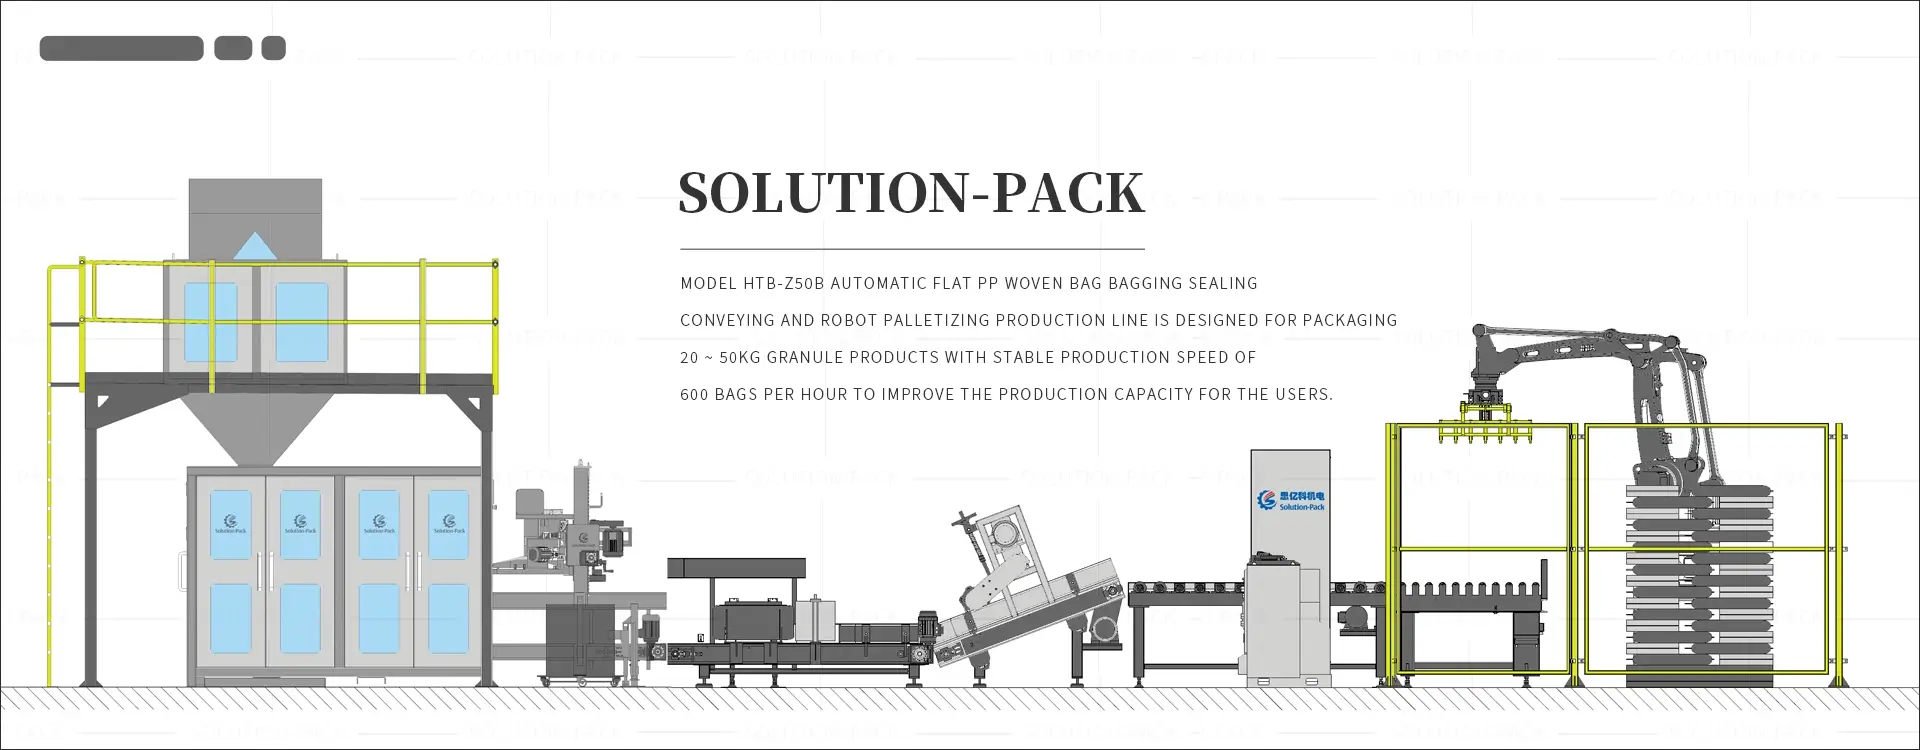 Model HTB-Z50B Bagging Palletizing Line for Flat PP Woven Bags Packaging | Solution-Pack (Middle Banner Picture)